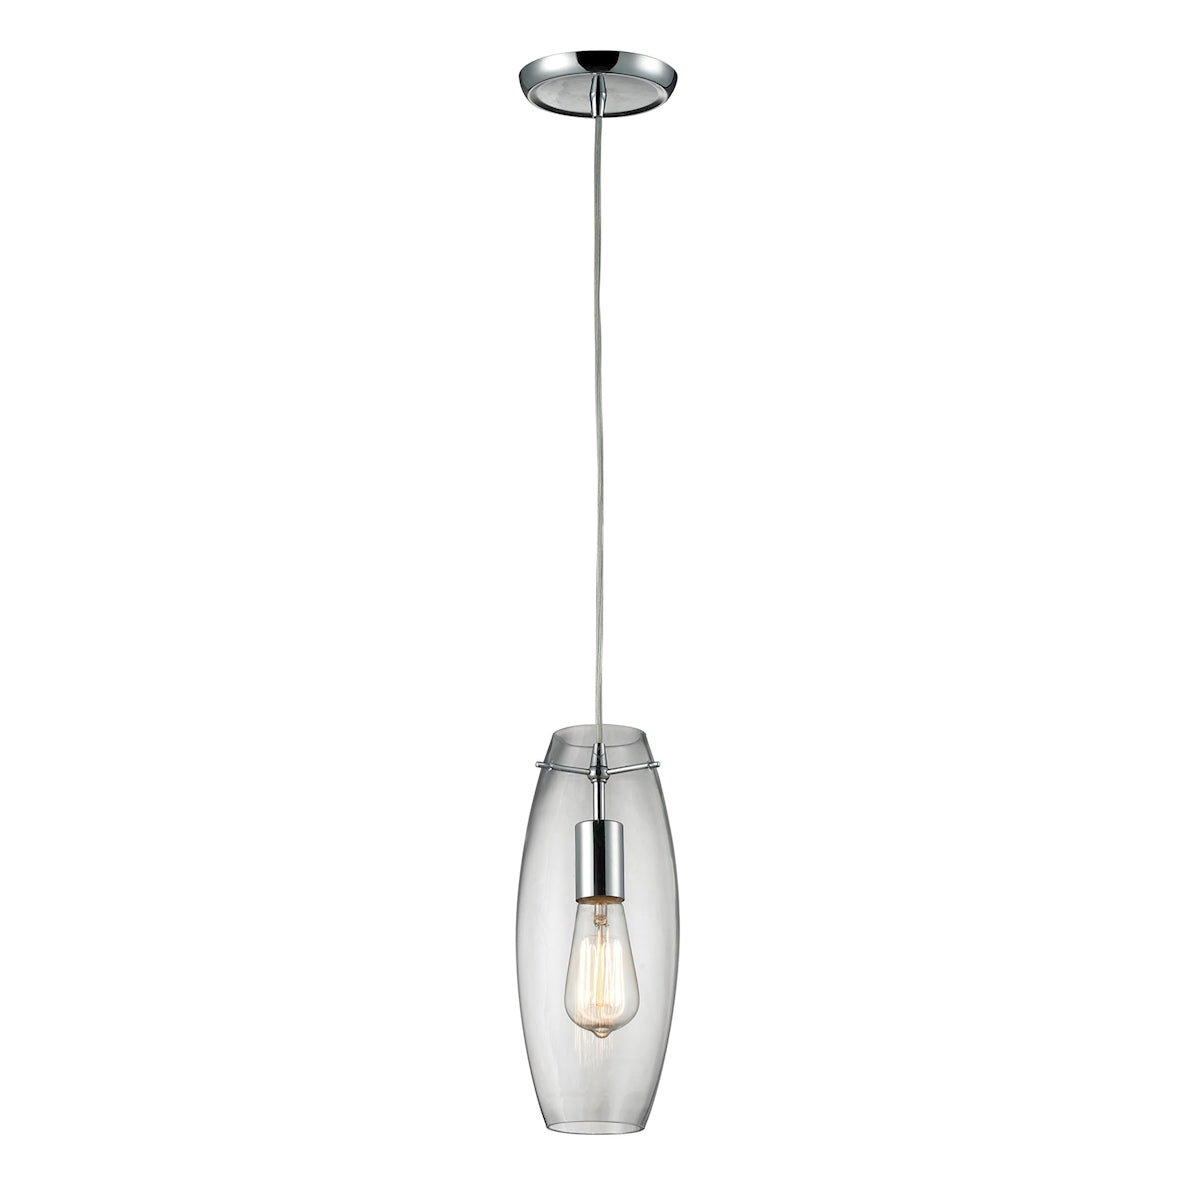 ELK Lighting 60054-1 - Menlow Park 5" Wide 1-Light Mini Pendant in Polished Chrome with Smoked Glass